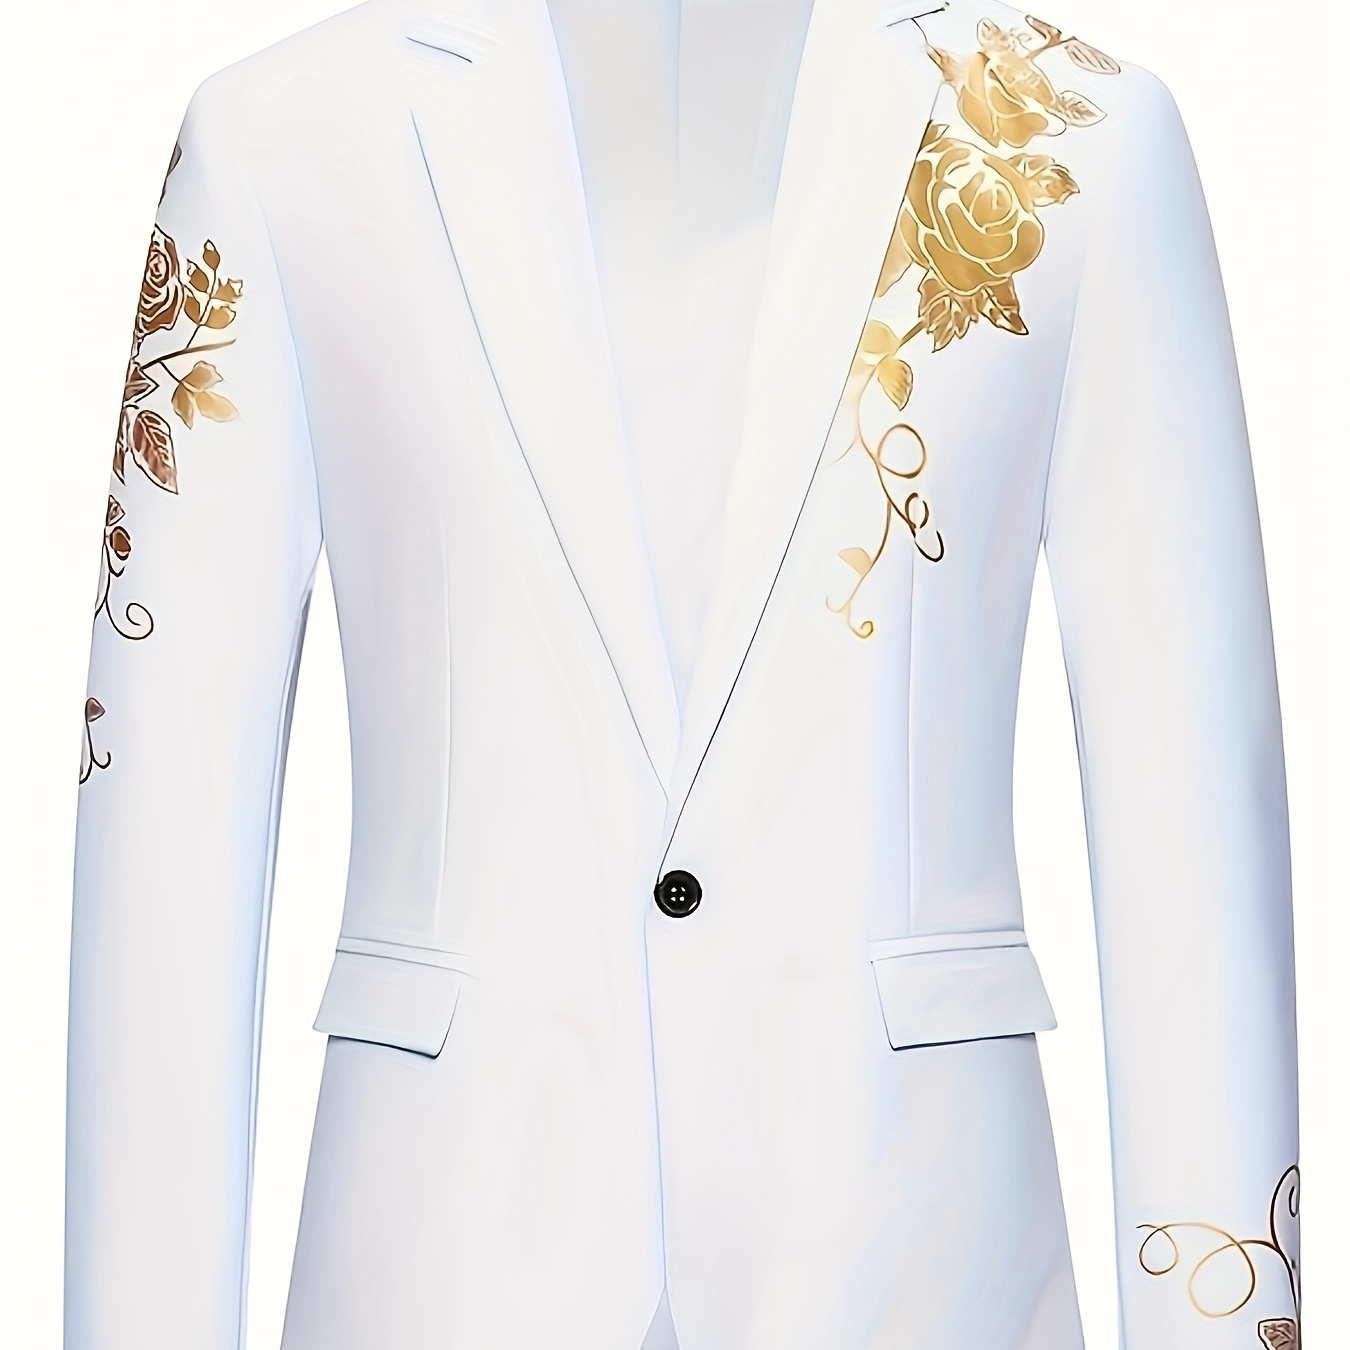 

Floral Pattern Blazer, Men's Casual Flap Pocket Lapel Suit Jacket For Spring Fall Business, Old Money Style